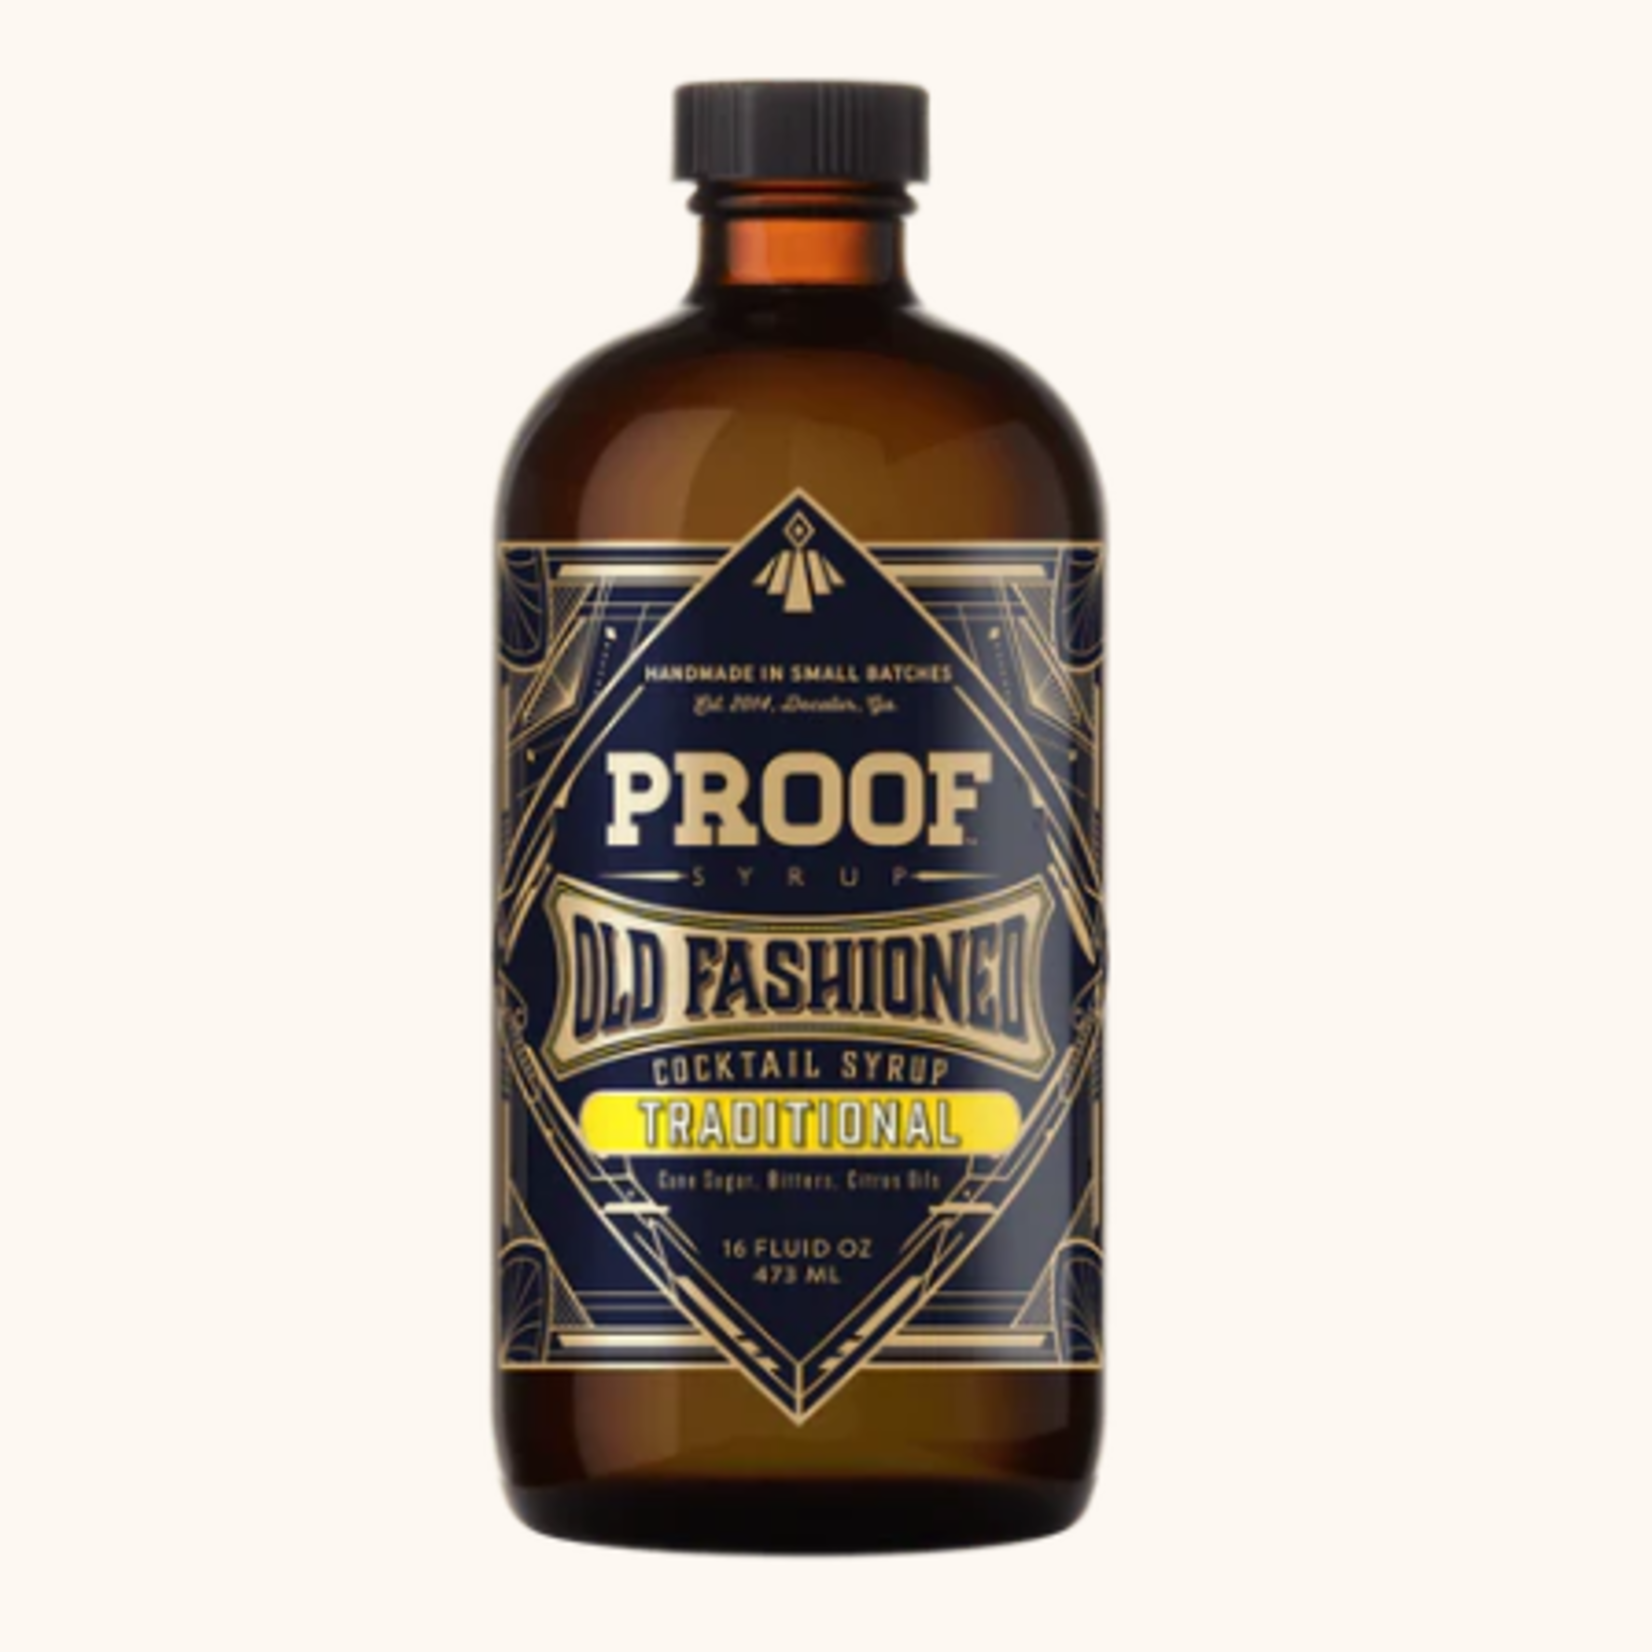 Proof Syrup Proof Syrup 16oz Traditional Old Fashioned Cocktail Syrup